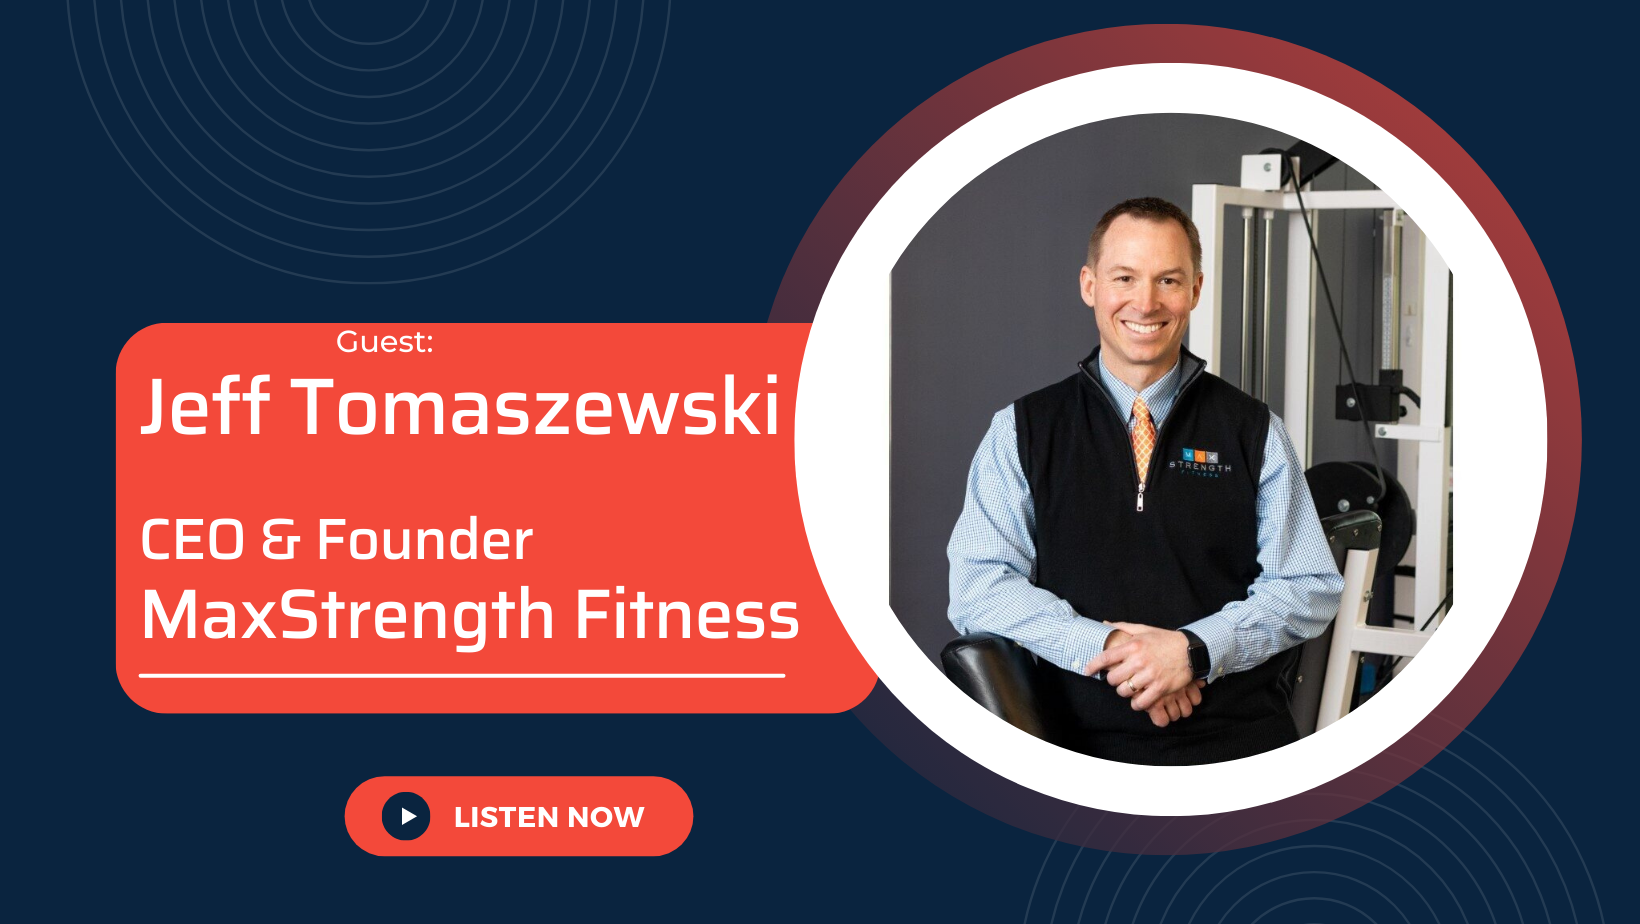 How To Achieve A Successful Work-Life Balance with the CEO & Founder of MaxStrength Fitness, Jeff Tomaszewski